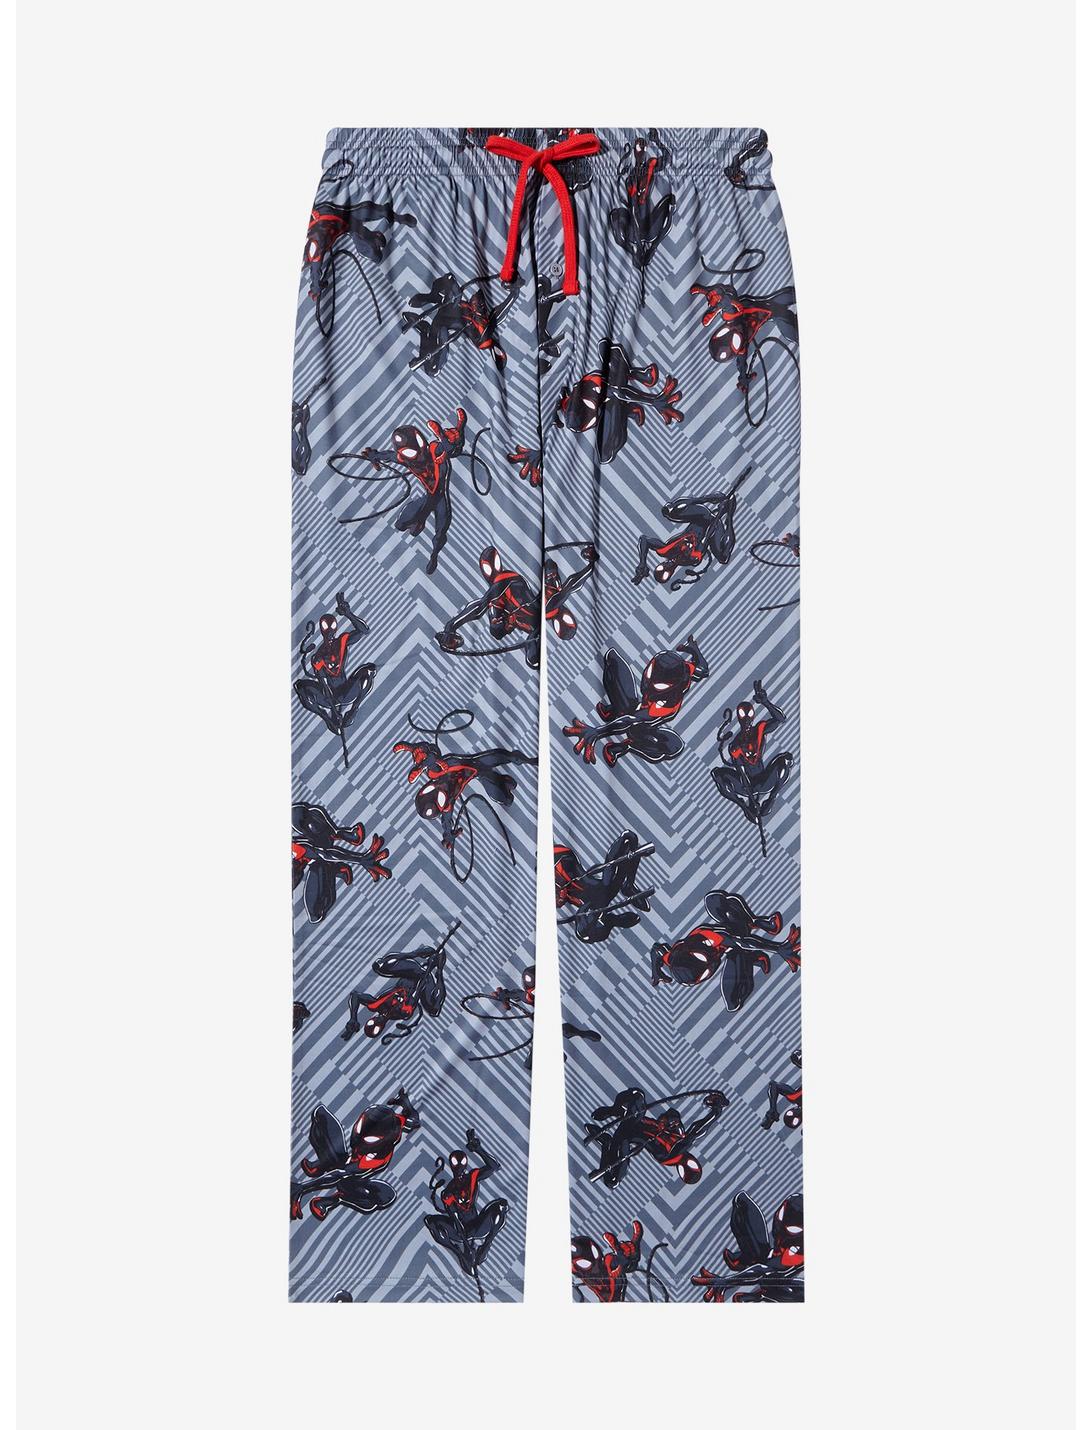 Marvel Spider-Man Miles Morales Allover Print Sleep Pants - BoxLunch Exclusive, CHARCOAL, hi-res